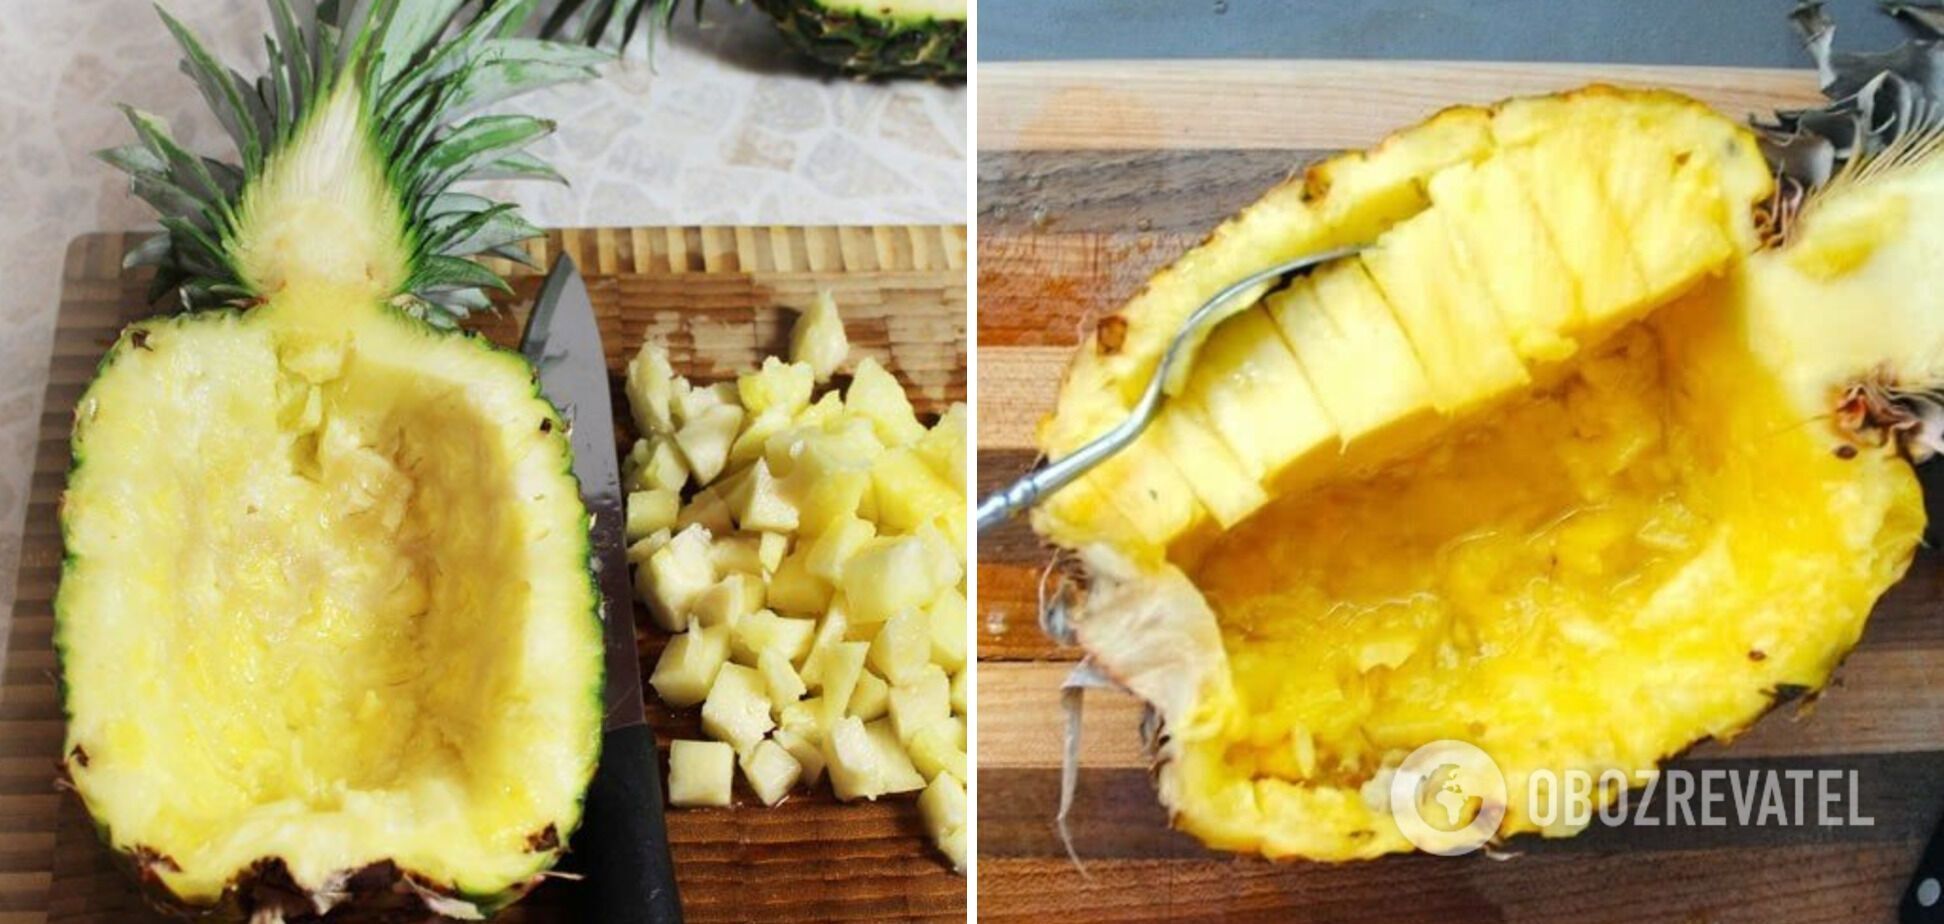 Pineapple for stuffing